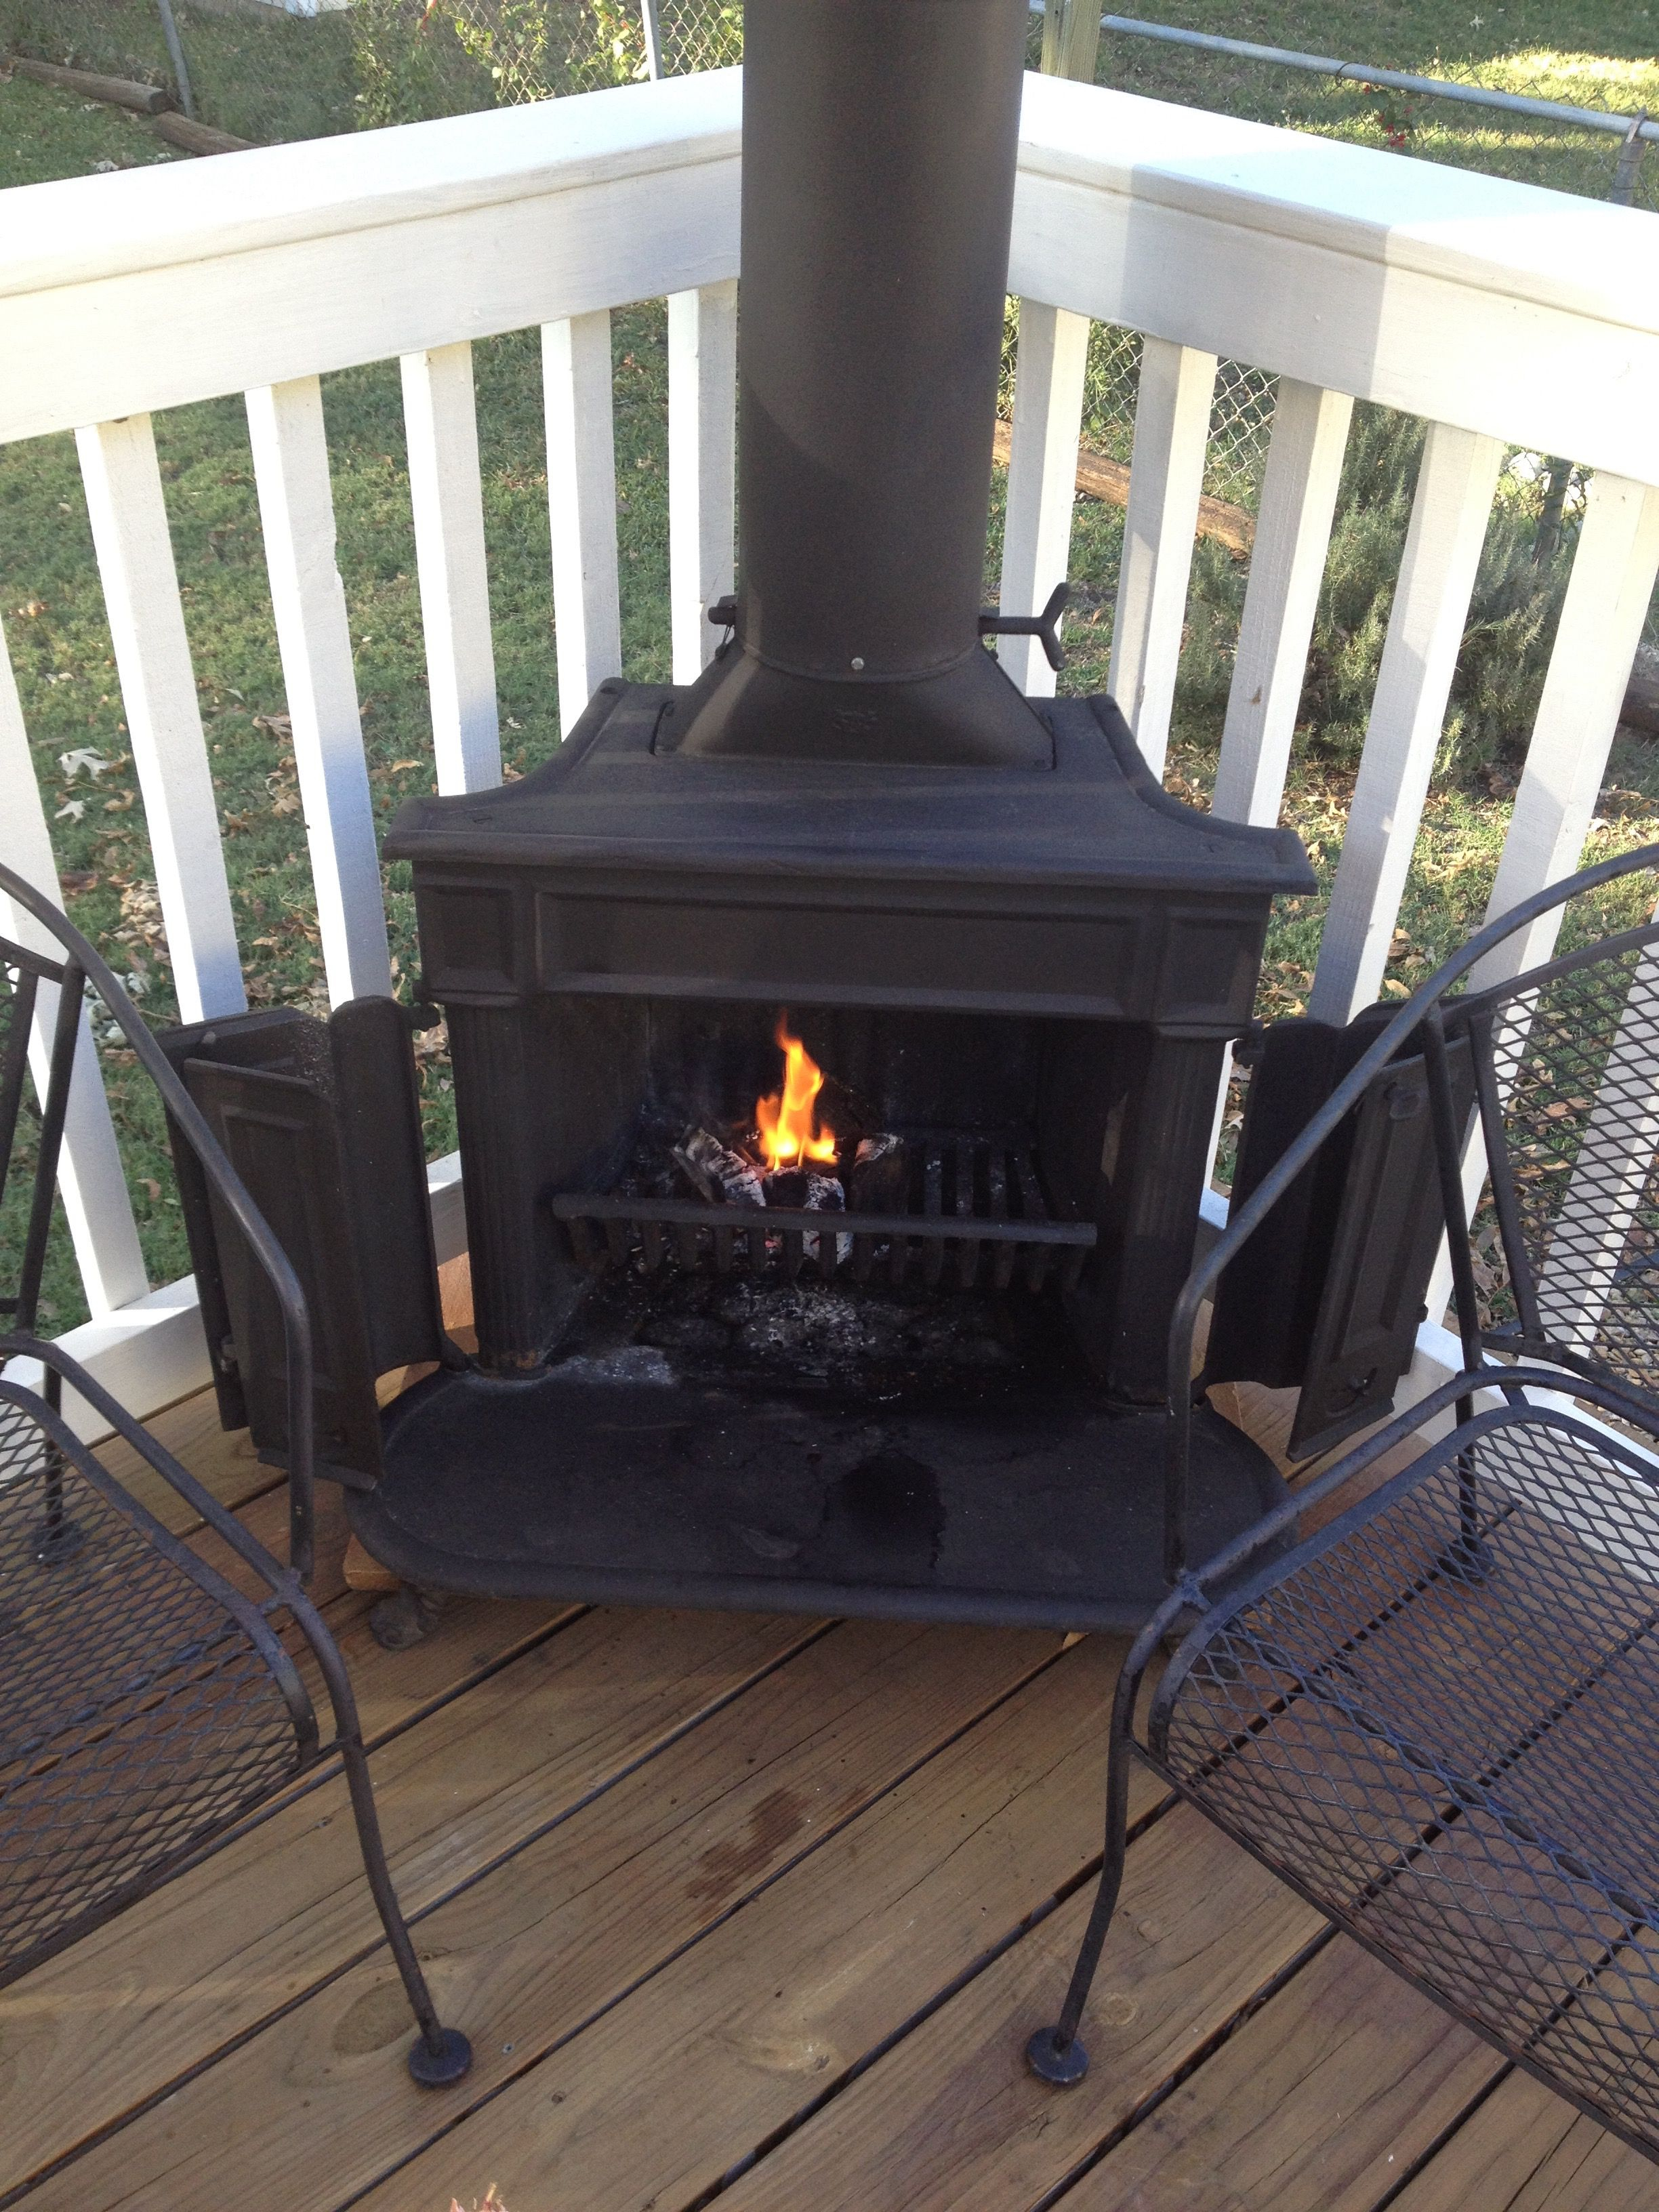 Franklin Stove On My Deck Stuff Ive Built In 2019 Outdoor Wood intended for size 2448 X 3264